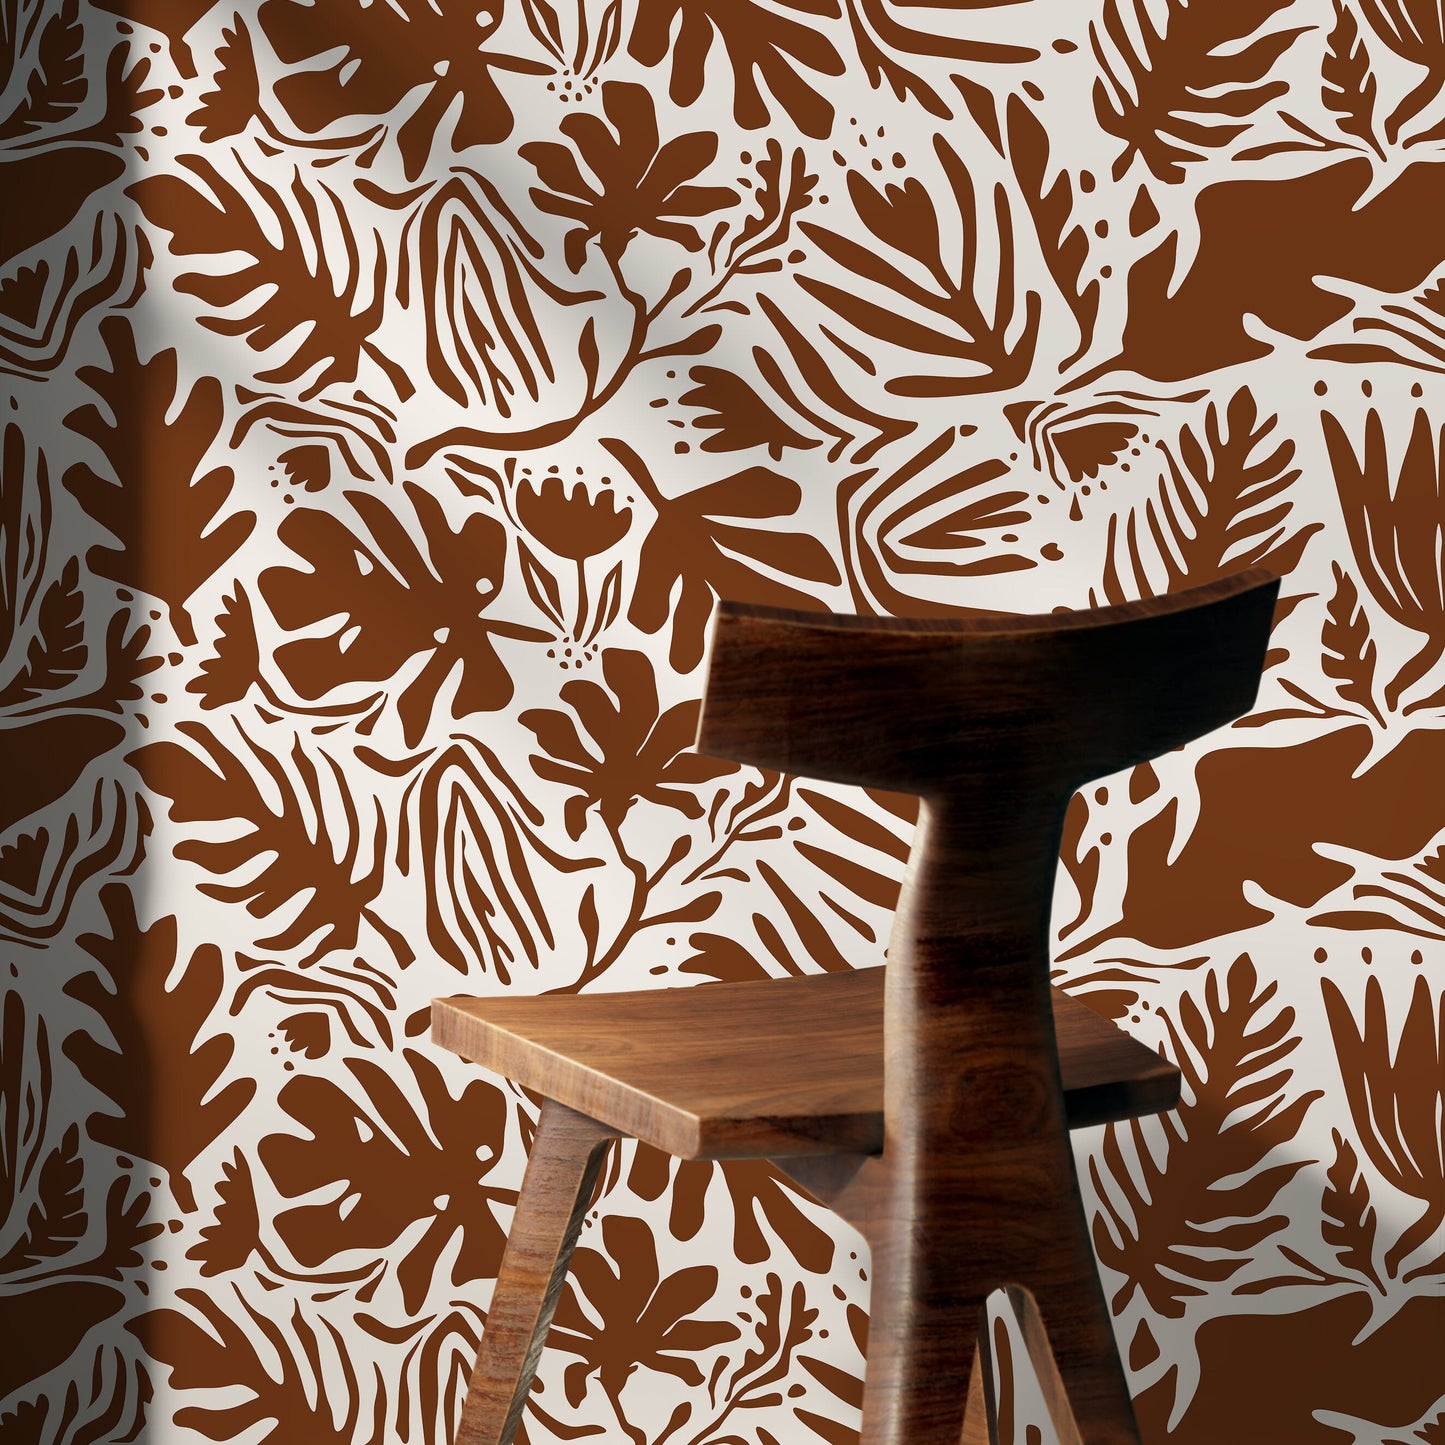 Copper Leaf Abstract Wallpaper Boho Wallpaper Peel and Stick and Traditional Wallpaper - D669